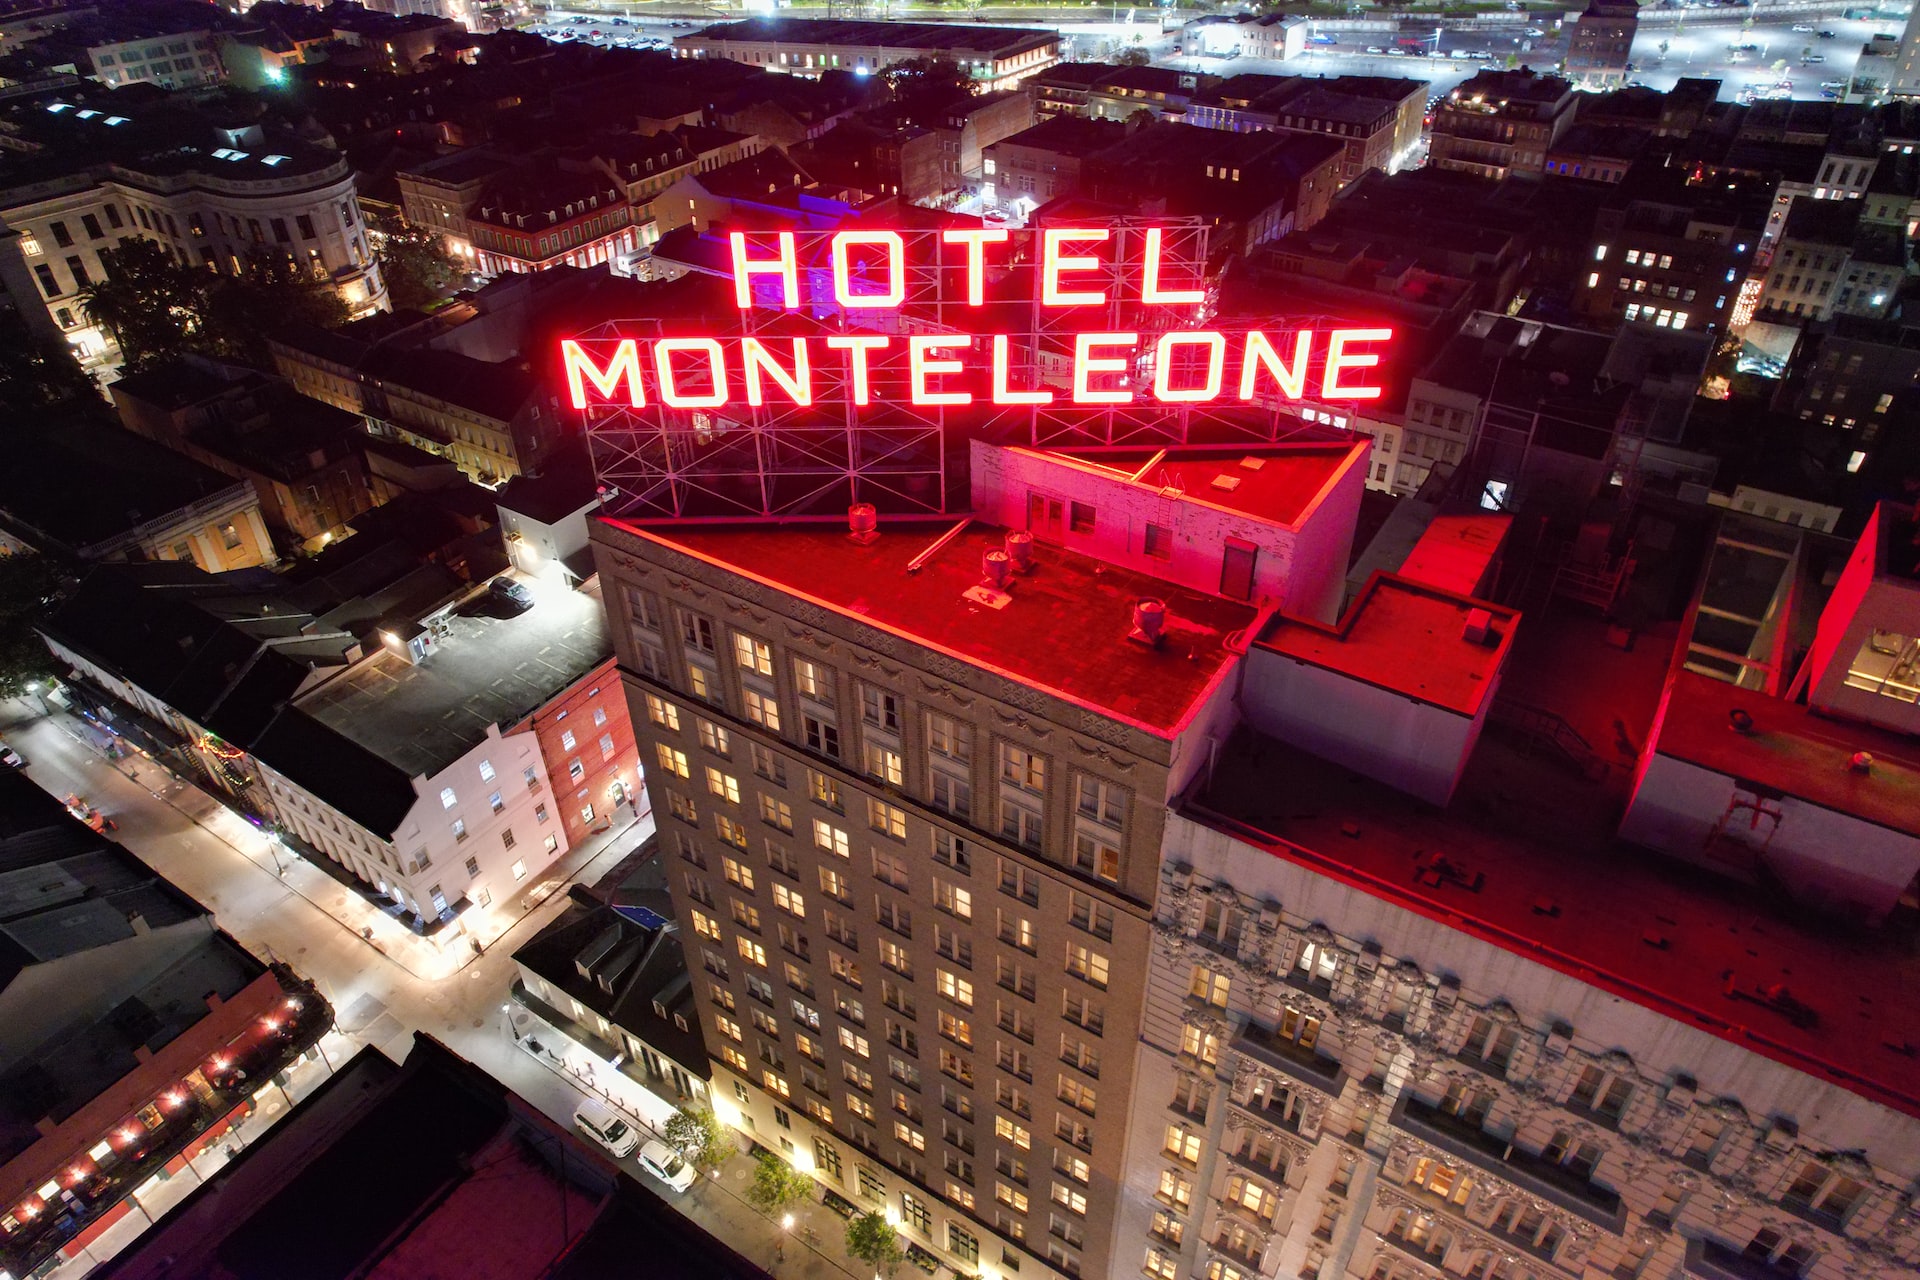 The Hotel Monteleone sign lit-up in big neon red lettering on the top of the building.